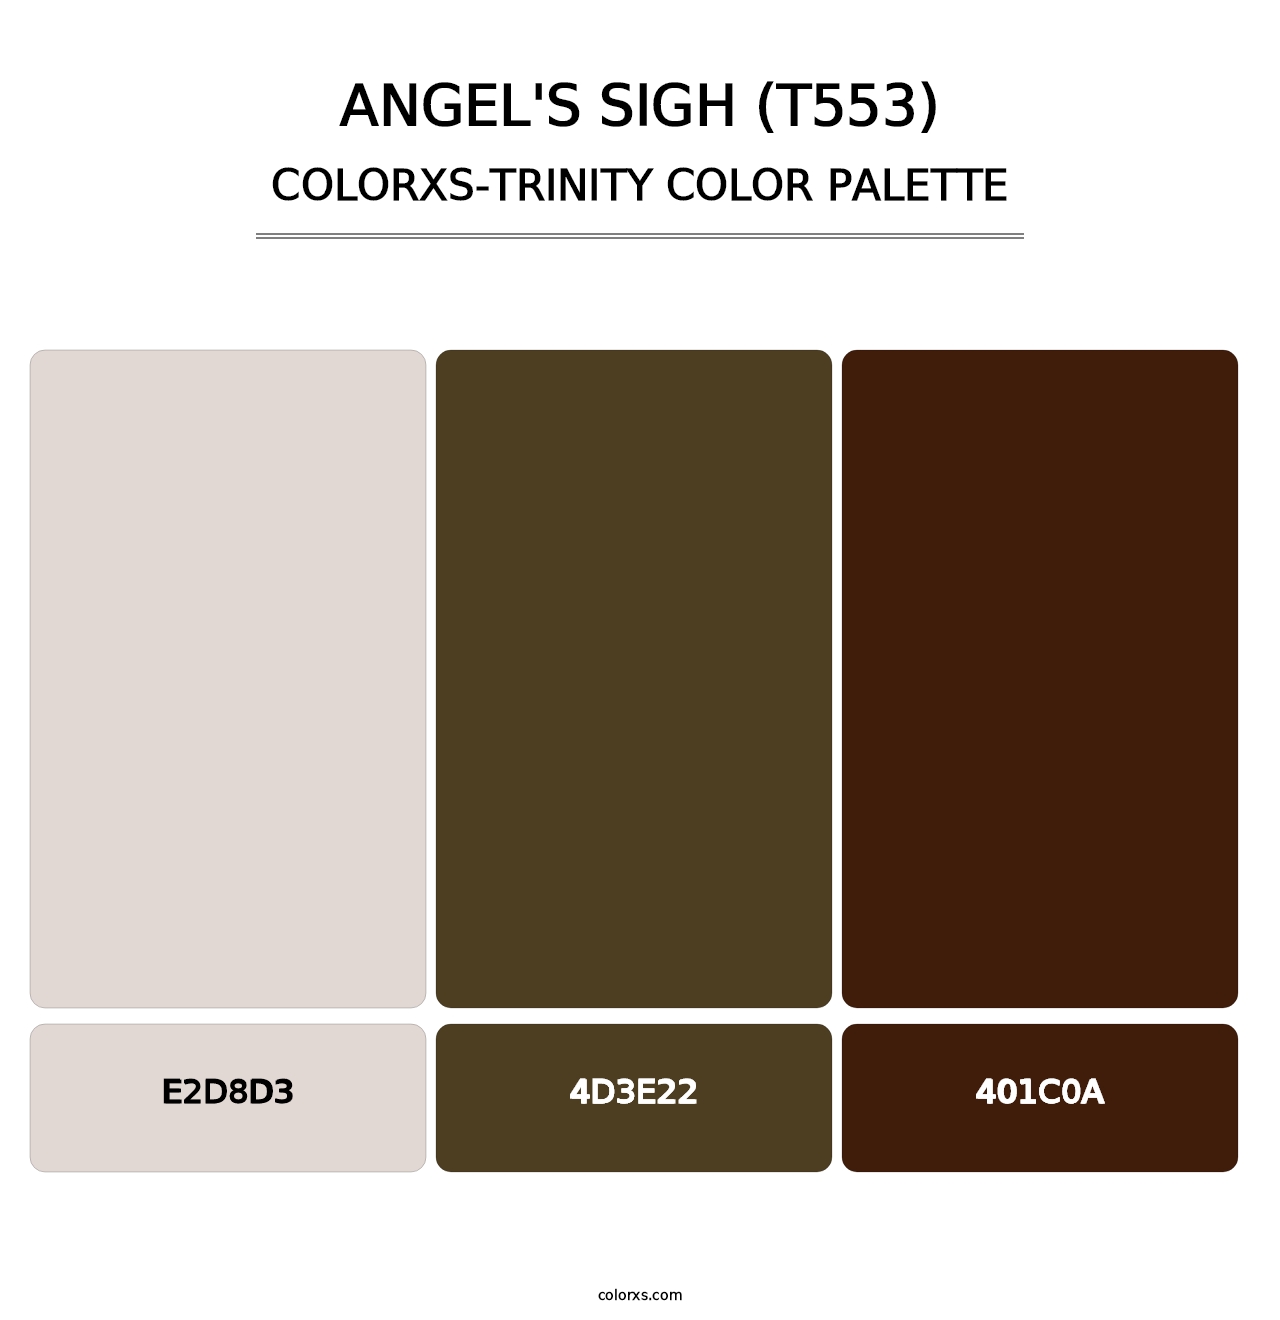 Angel's Sigh (T553) - Colorxs Trinity Palette